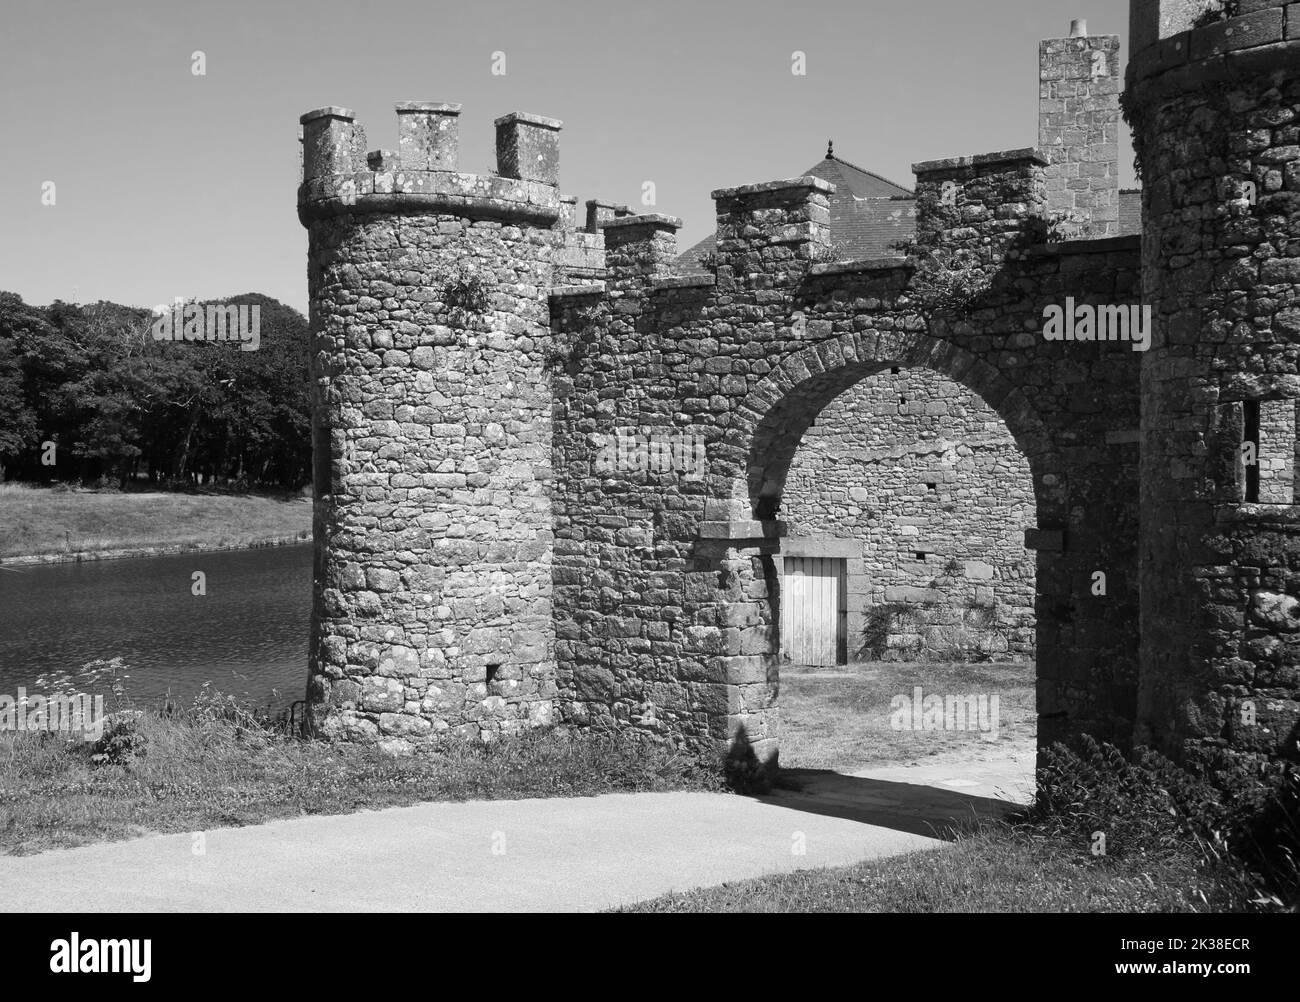 Chateau de Flamanville on the Cherbourg Peninsula, Normandy, France, Europe Stock Photo